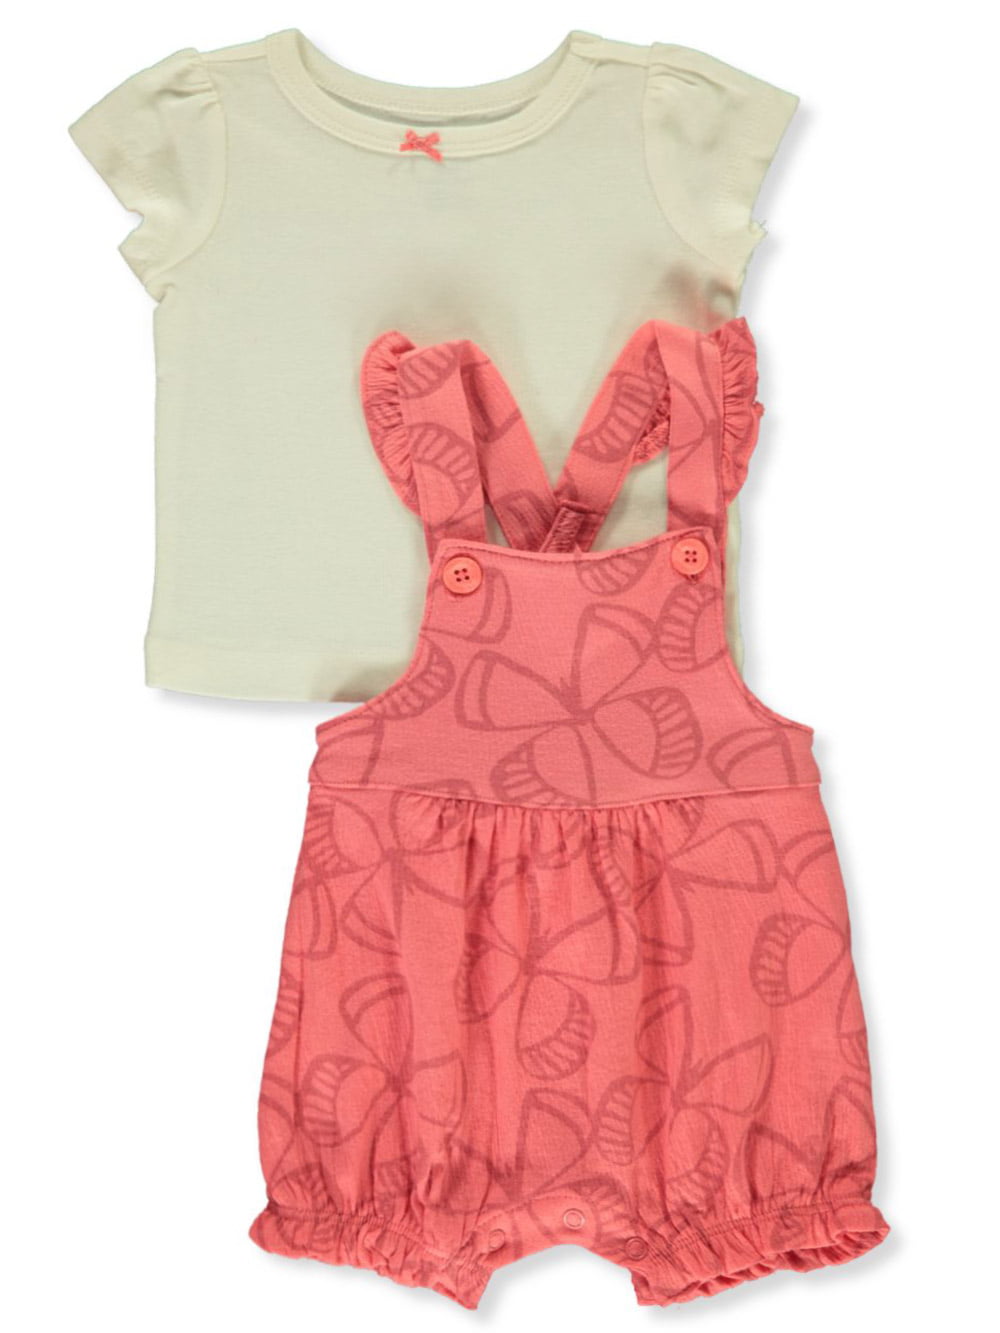 Carter’s Baby Girl Top And Leggings Set Size 2T in Coral/White 2 Pieces 